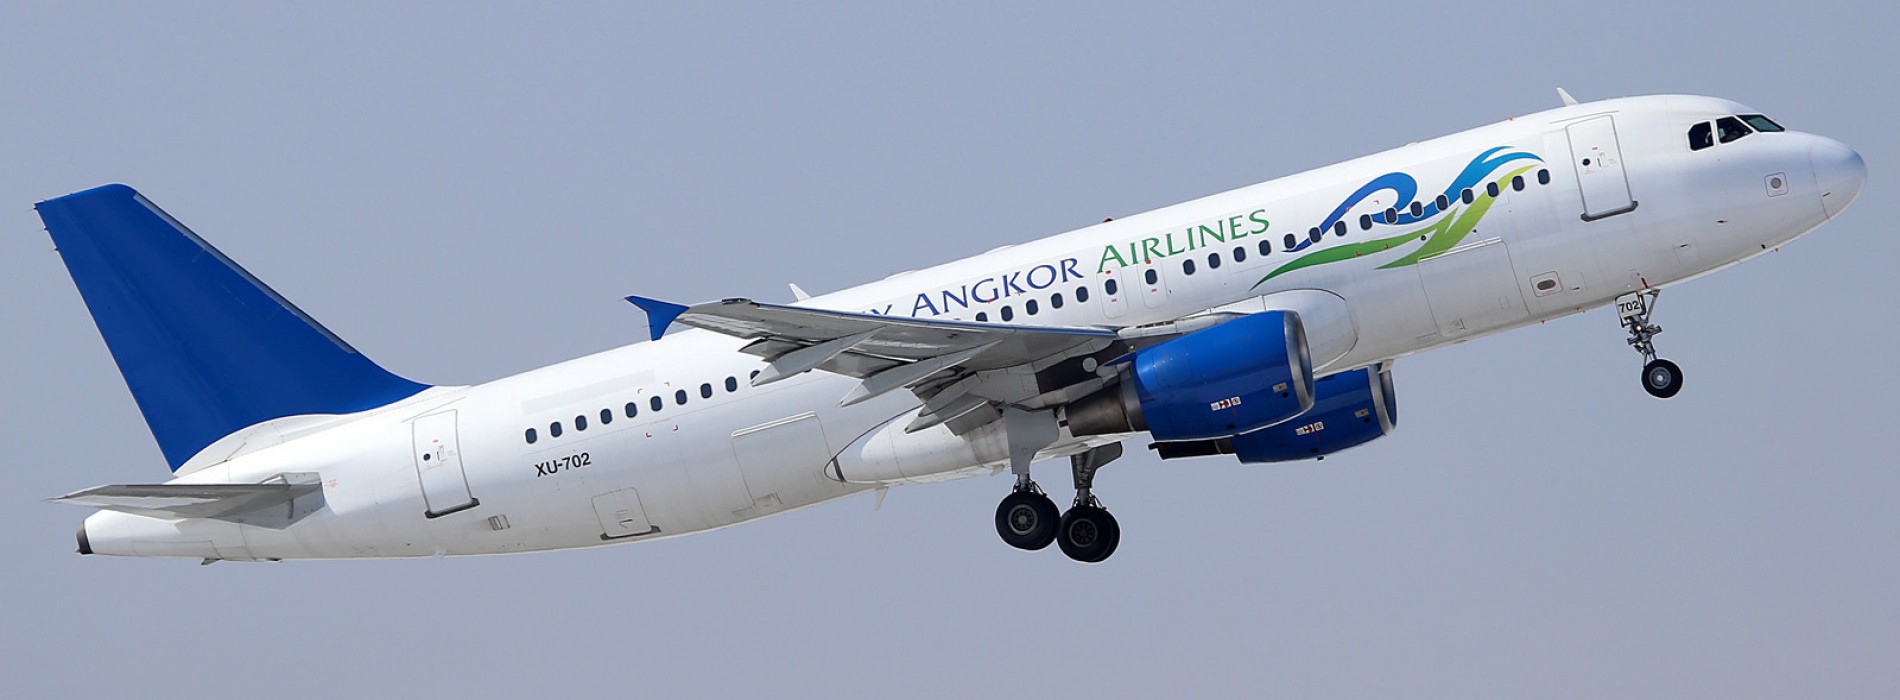 Sky Angkor Airlines selects Sabre to support its growth objectives